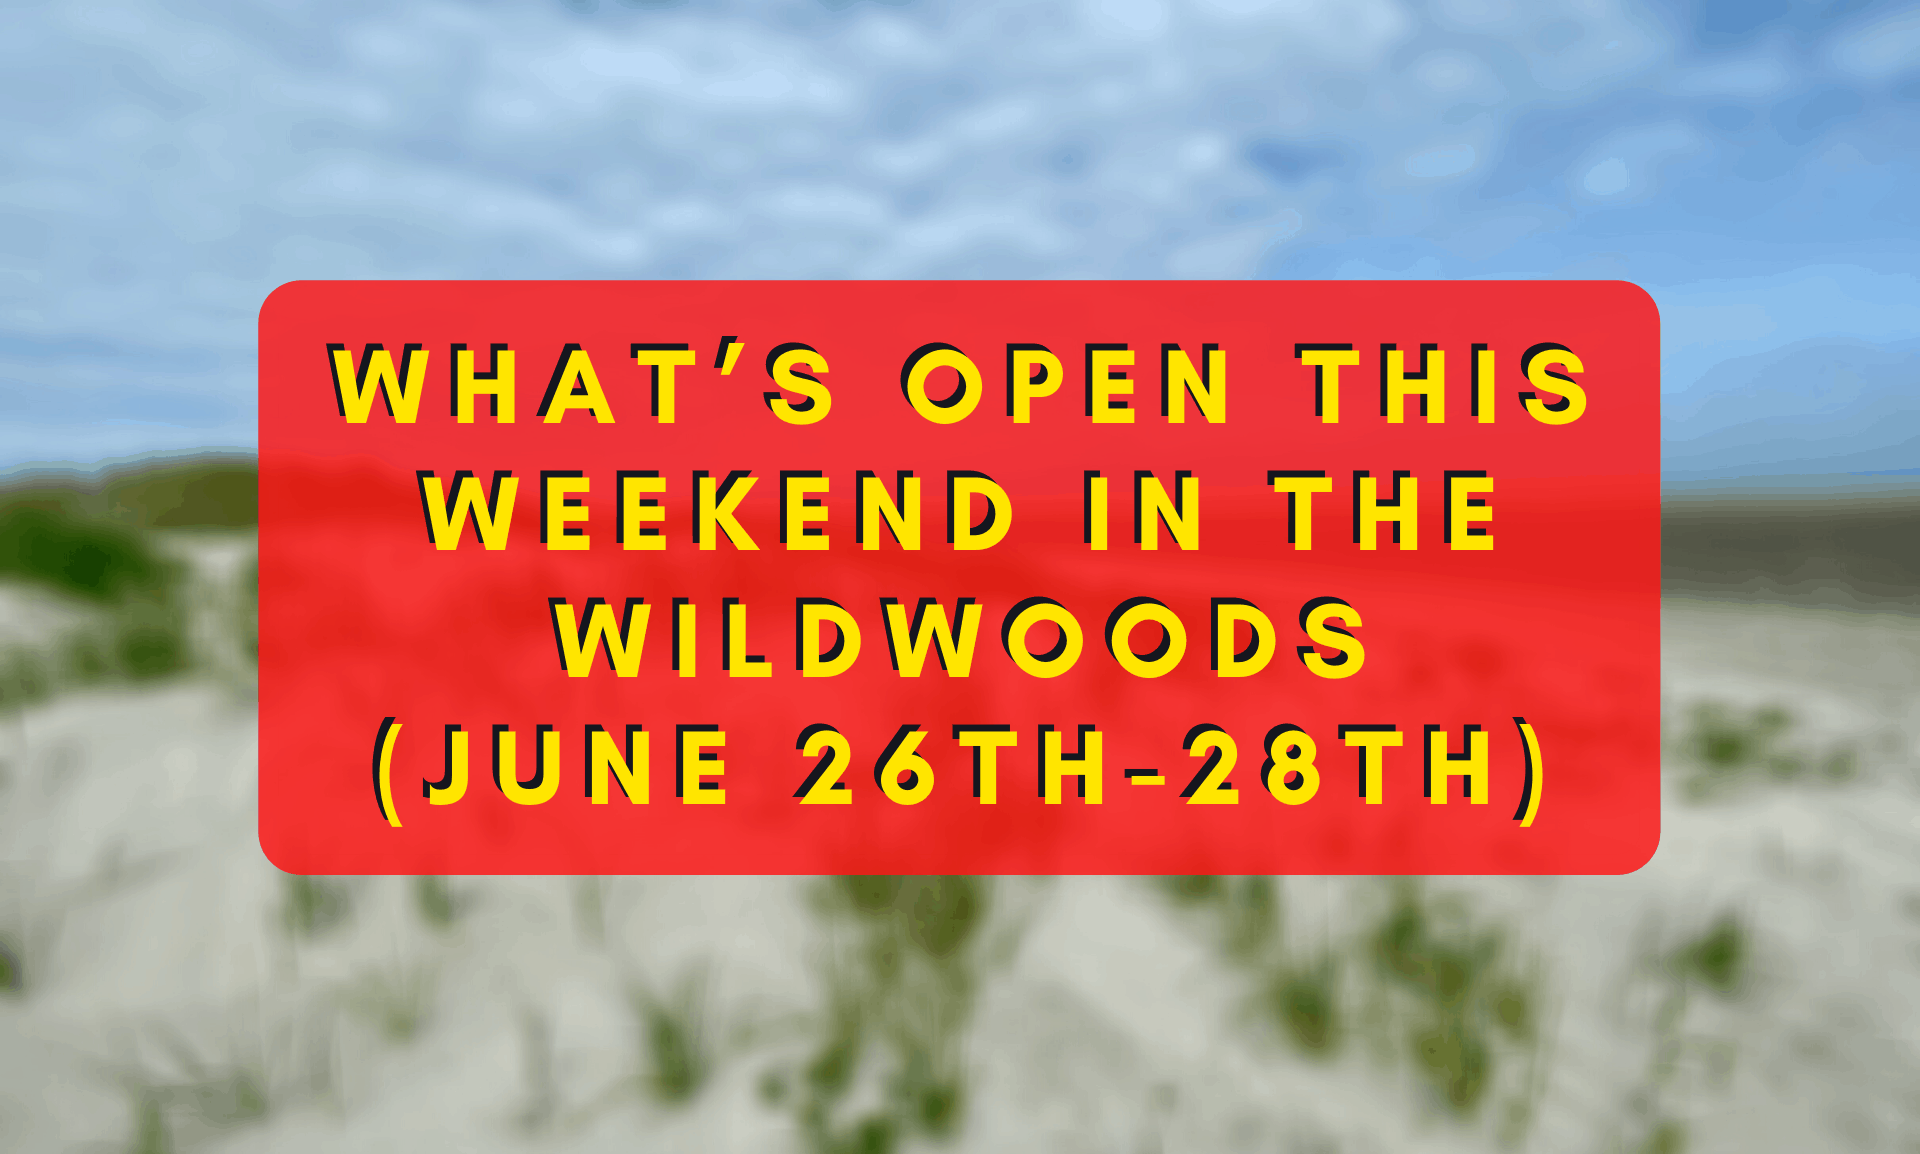 What’s Open This Weekend In The Wildwoods (June 26th-June 28th)